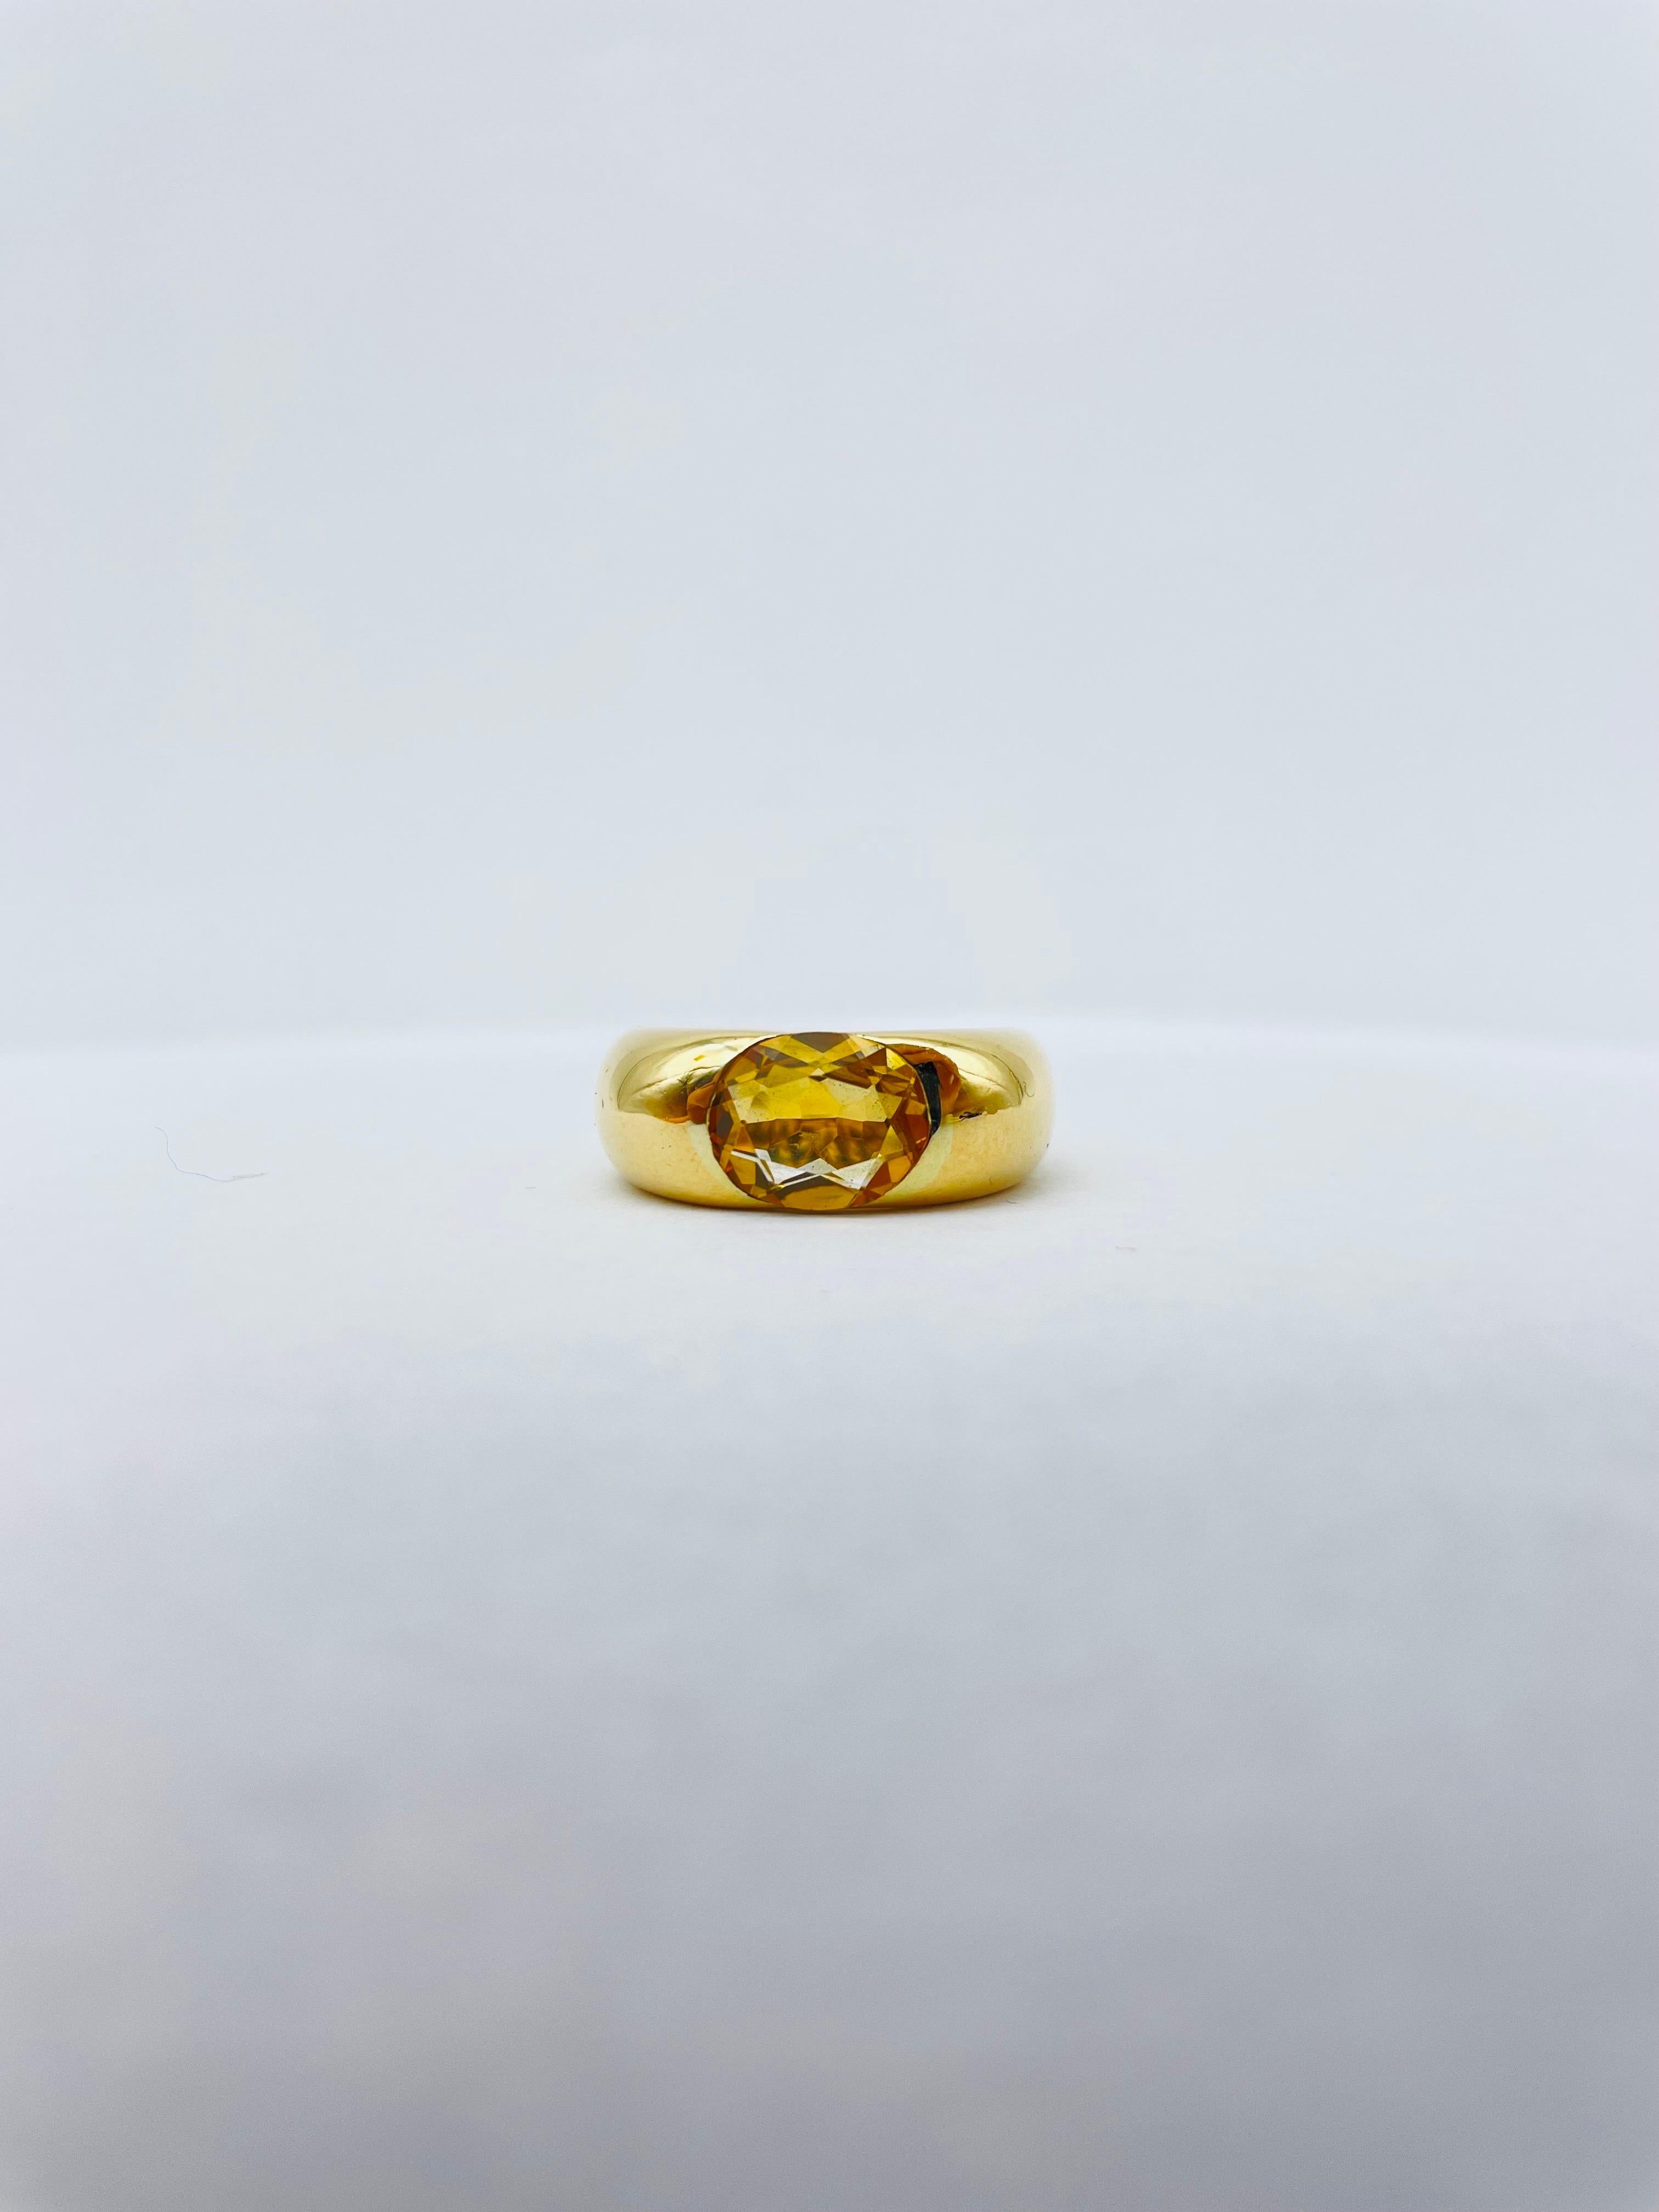 Behold the majestic Vintage Cartier 18K Ring, a true masterpiece that captures the essence of luxury and timeless elegance. This Big Ellipse Citrine Band Ring by Cartier from 1993 is a rare and sought-after treasure that will leave you